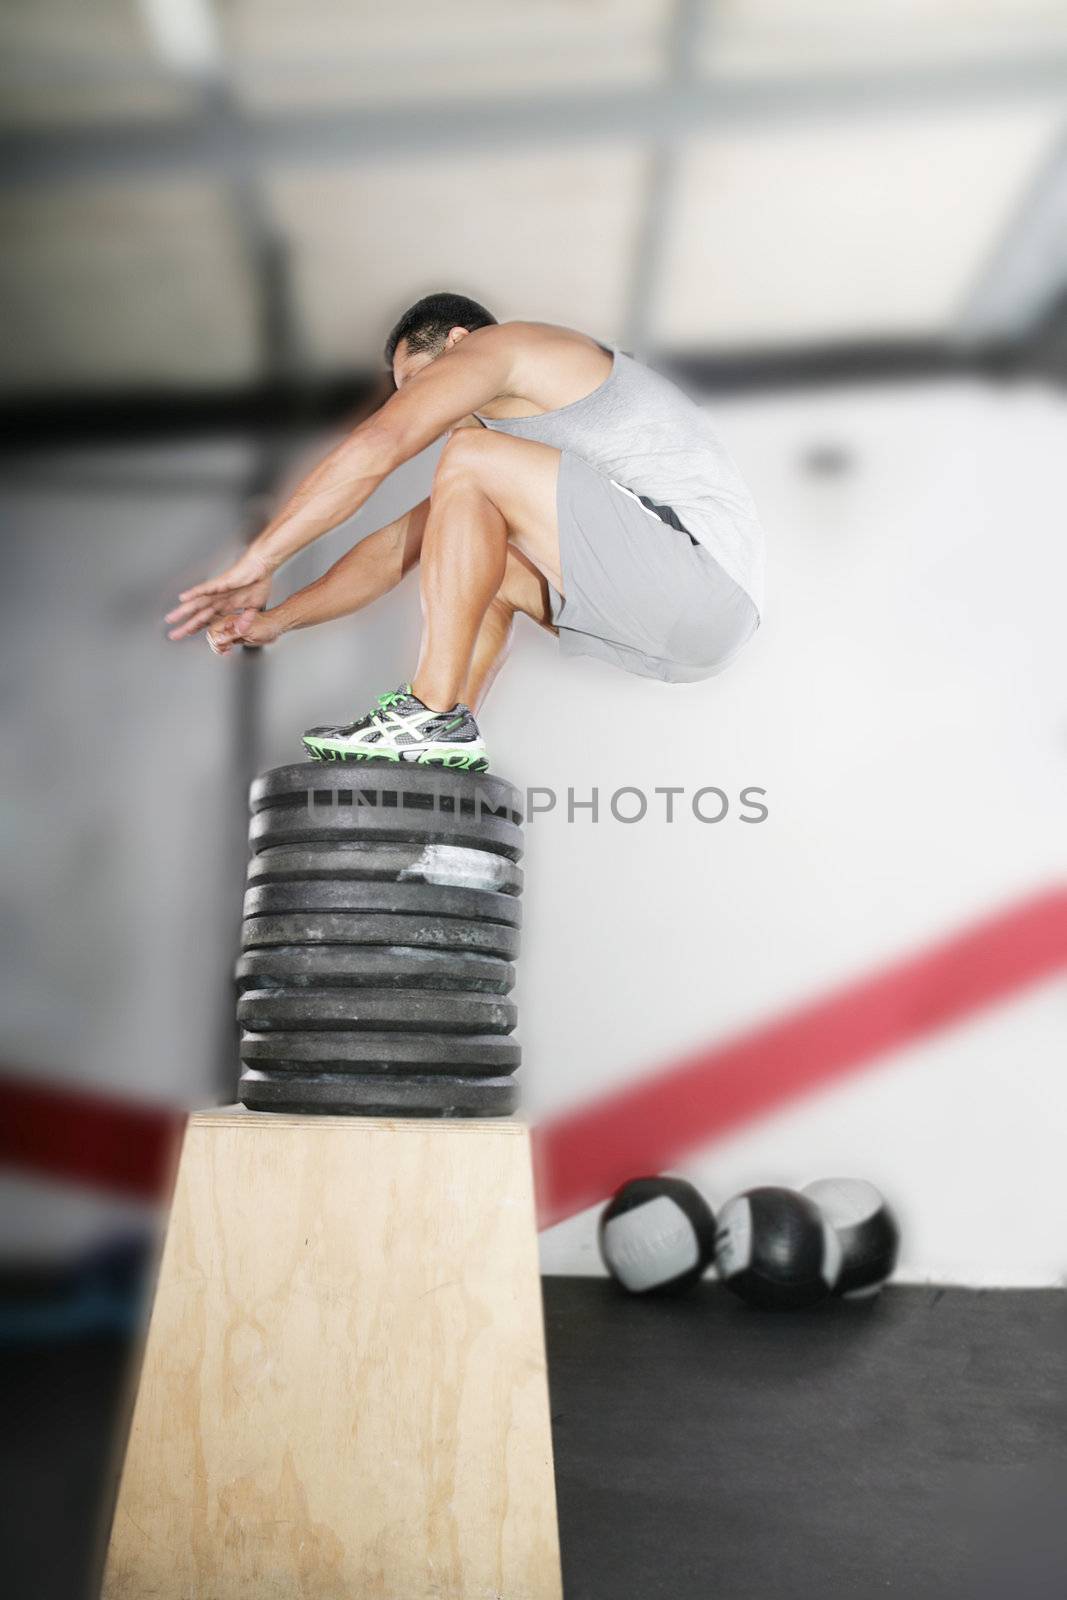 Crossfit Working Out Series